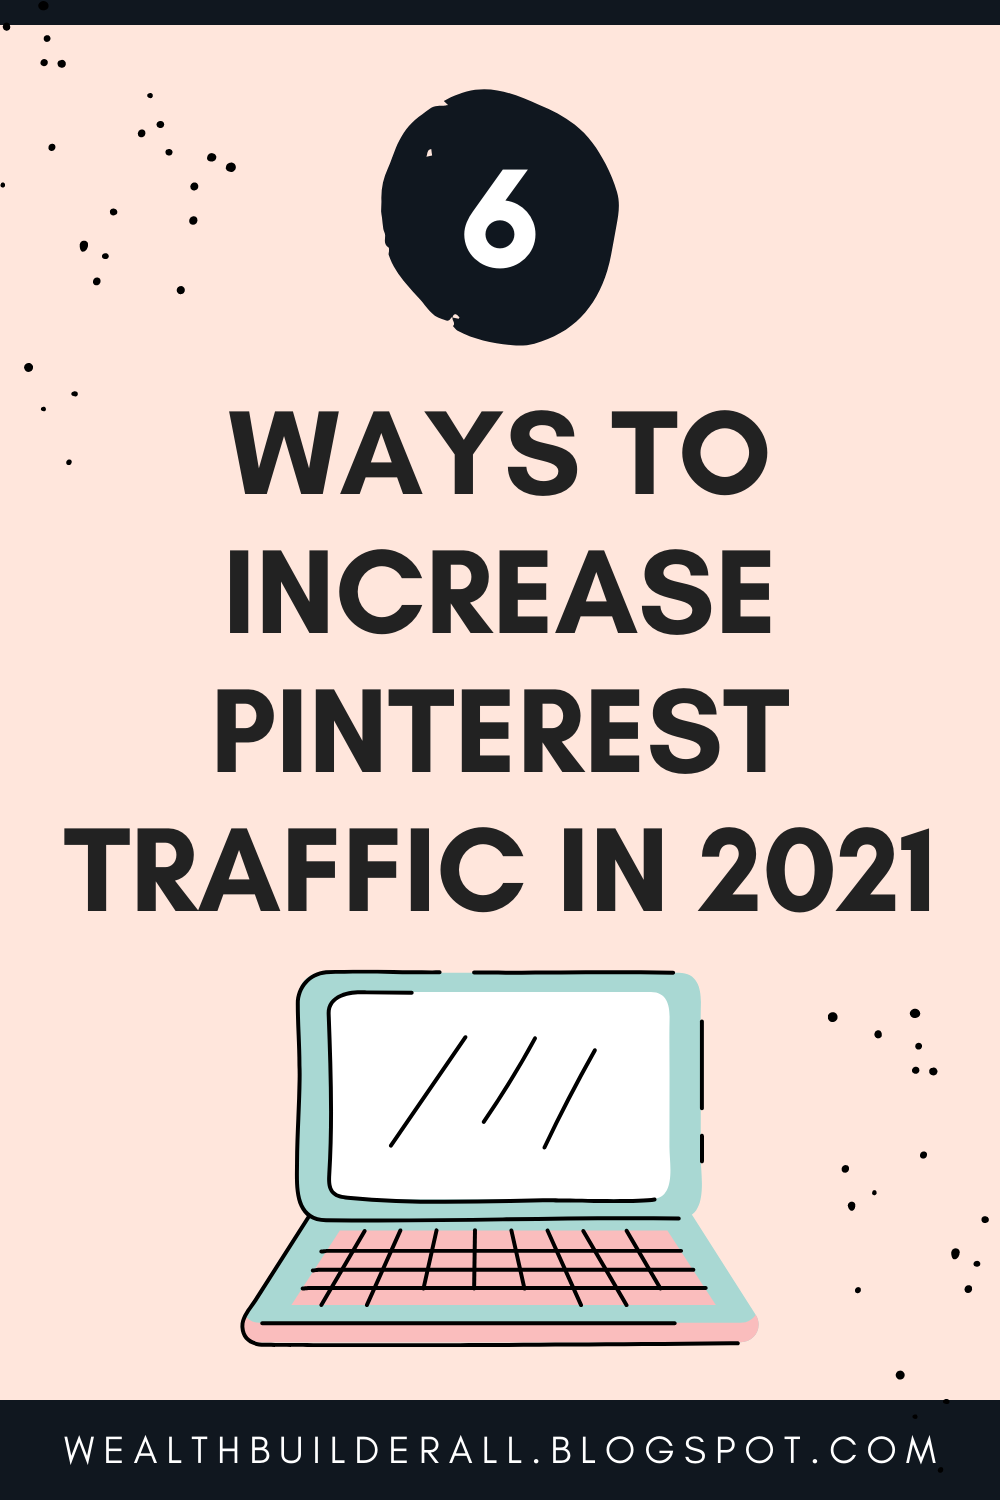 6 Ways To Increase Pinterest Traffic In 2021